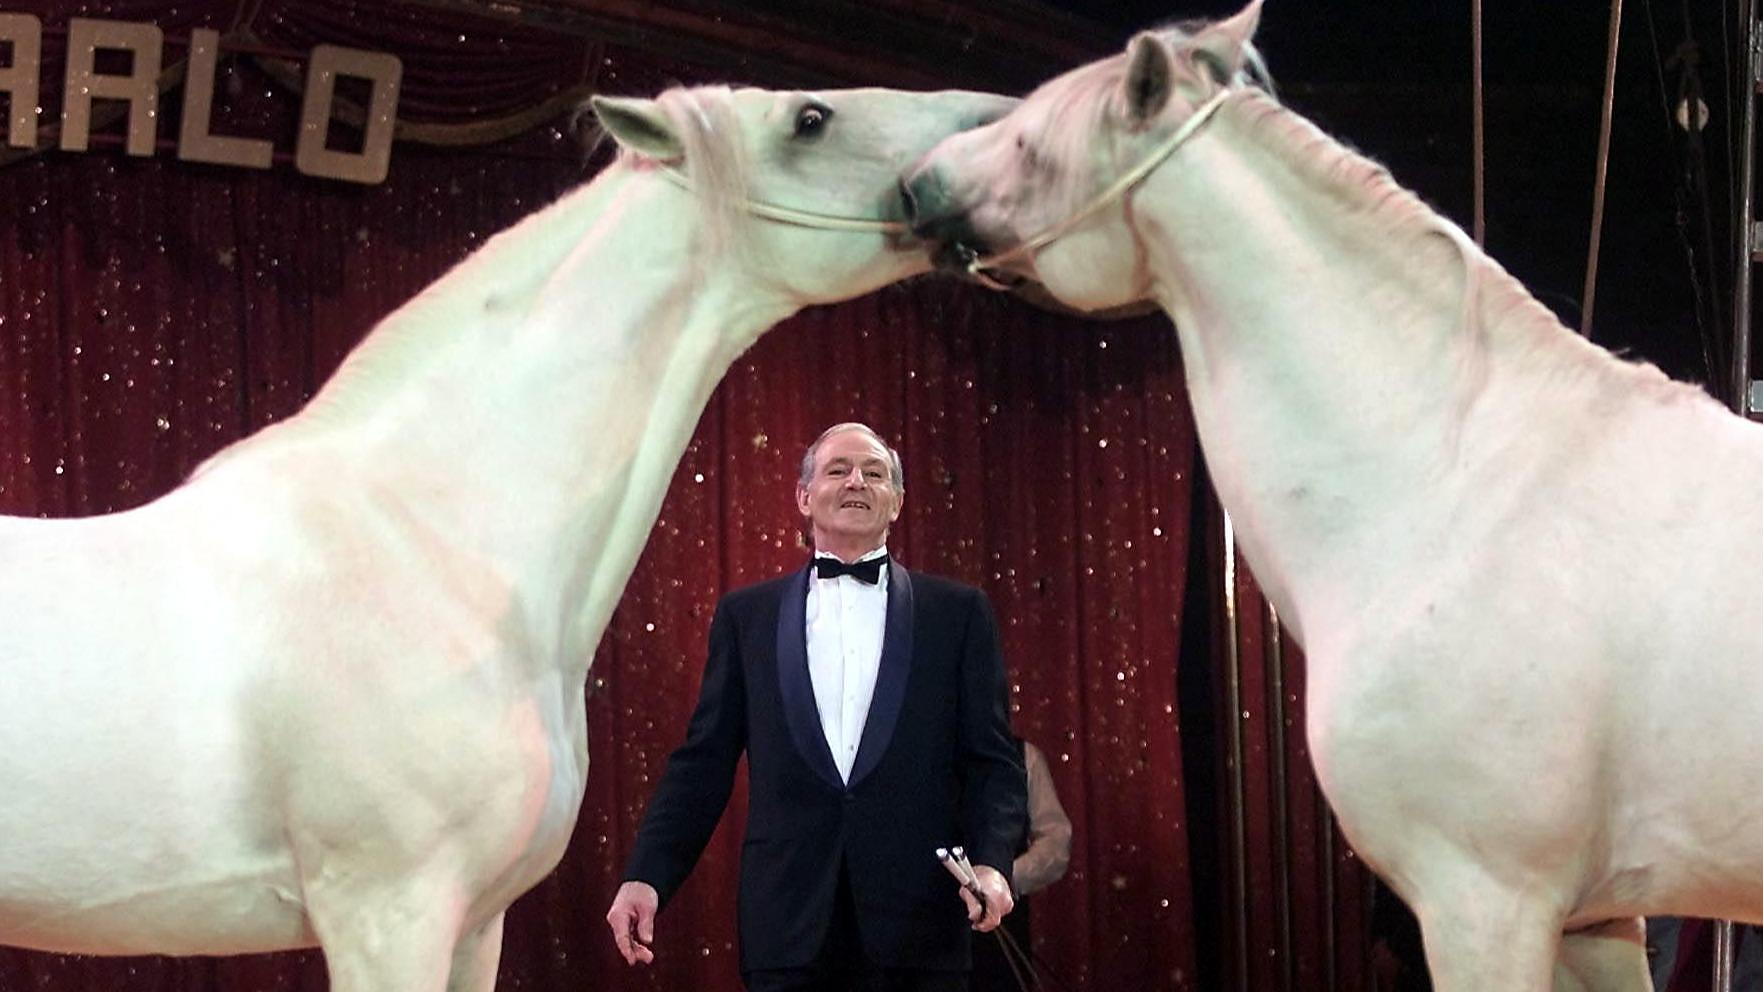 Alexis Gruss, the king of the equestrian circus, is dead